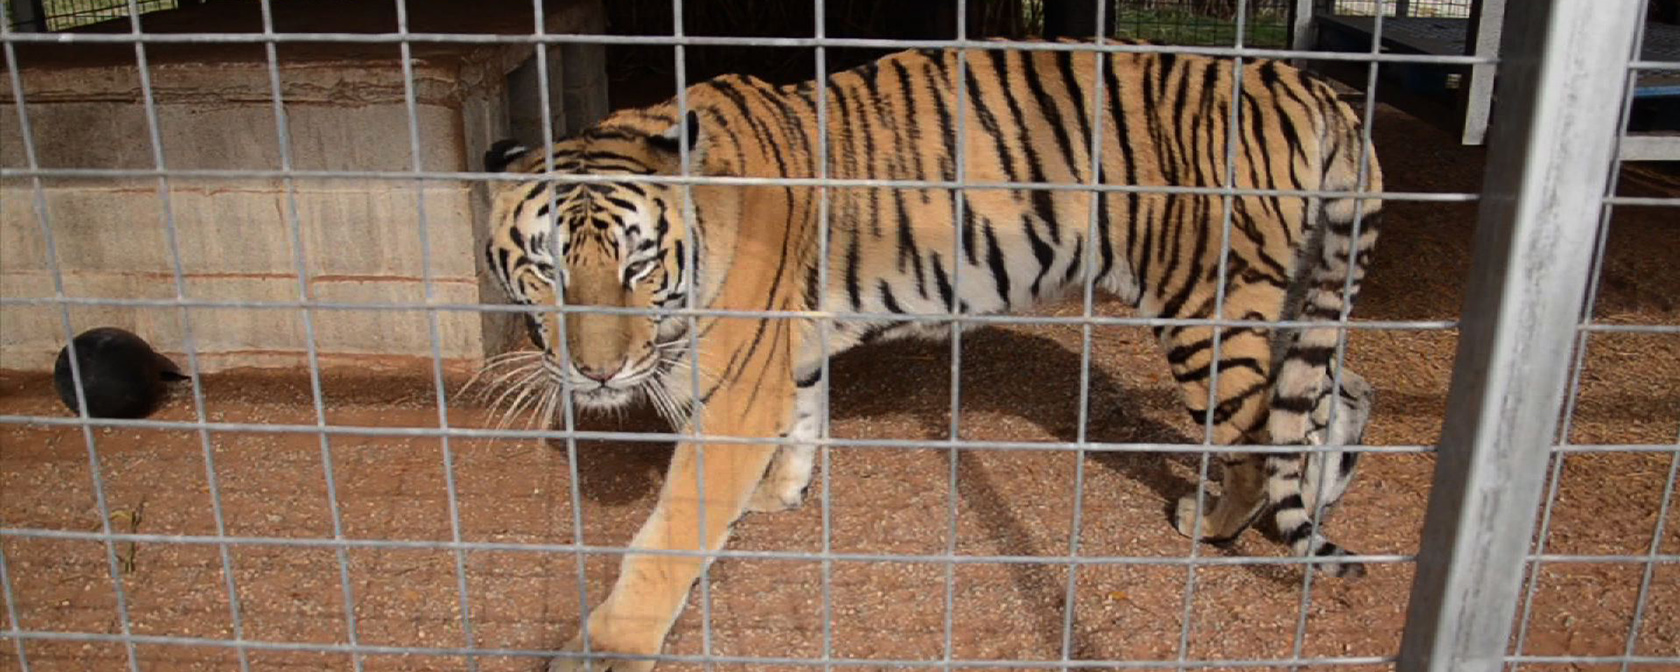 USDA suspends license of roadside zoo where Joe Exotic abused tigers | HSLF